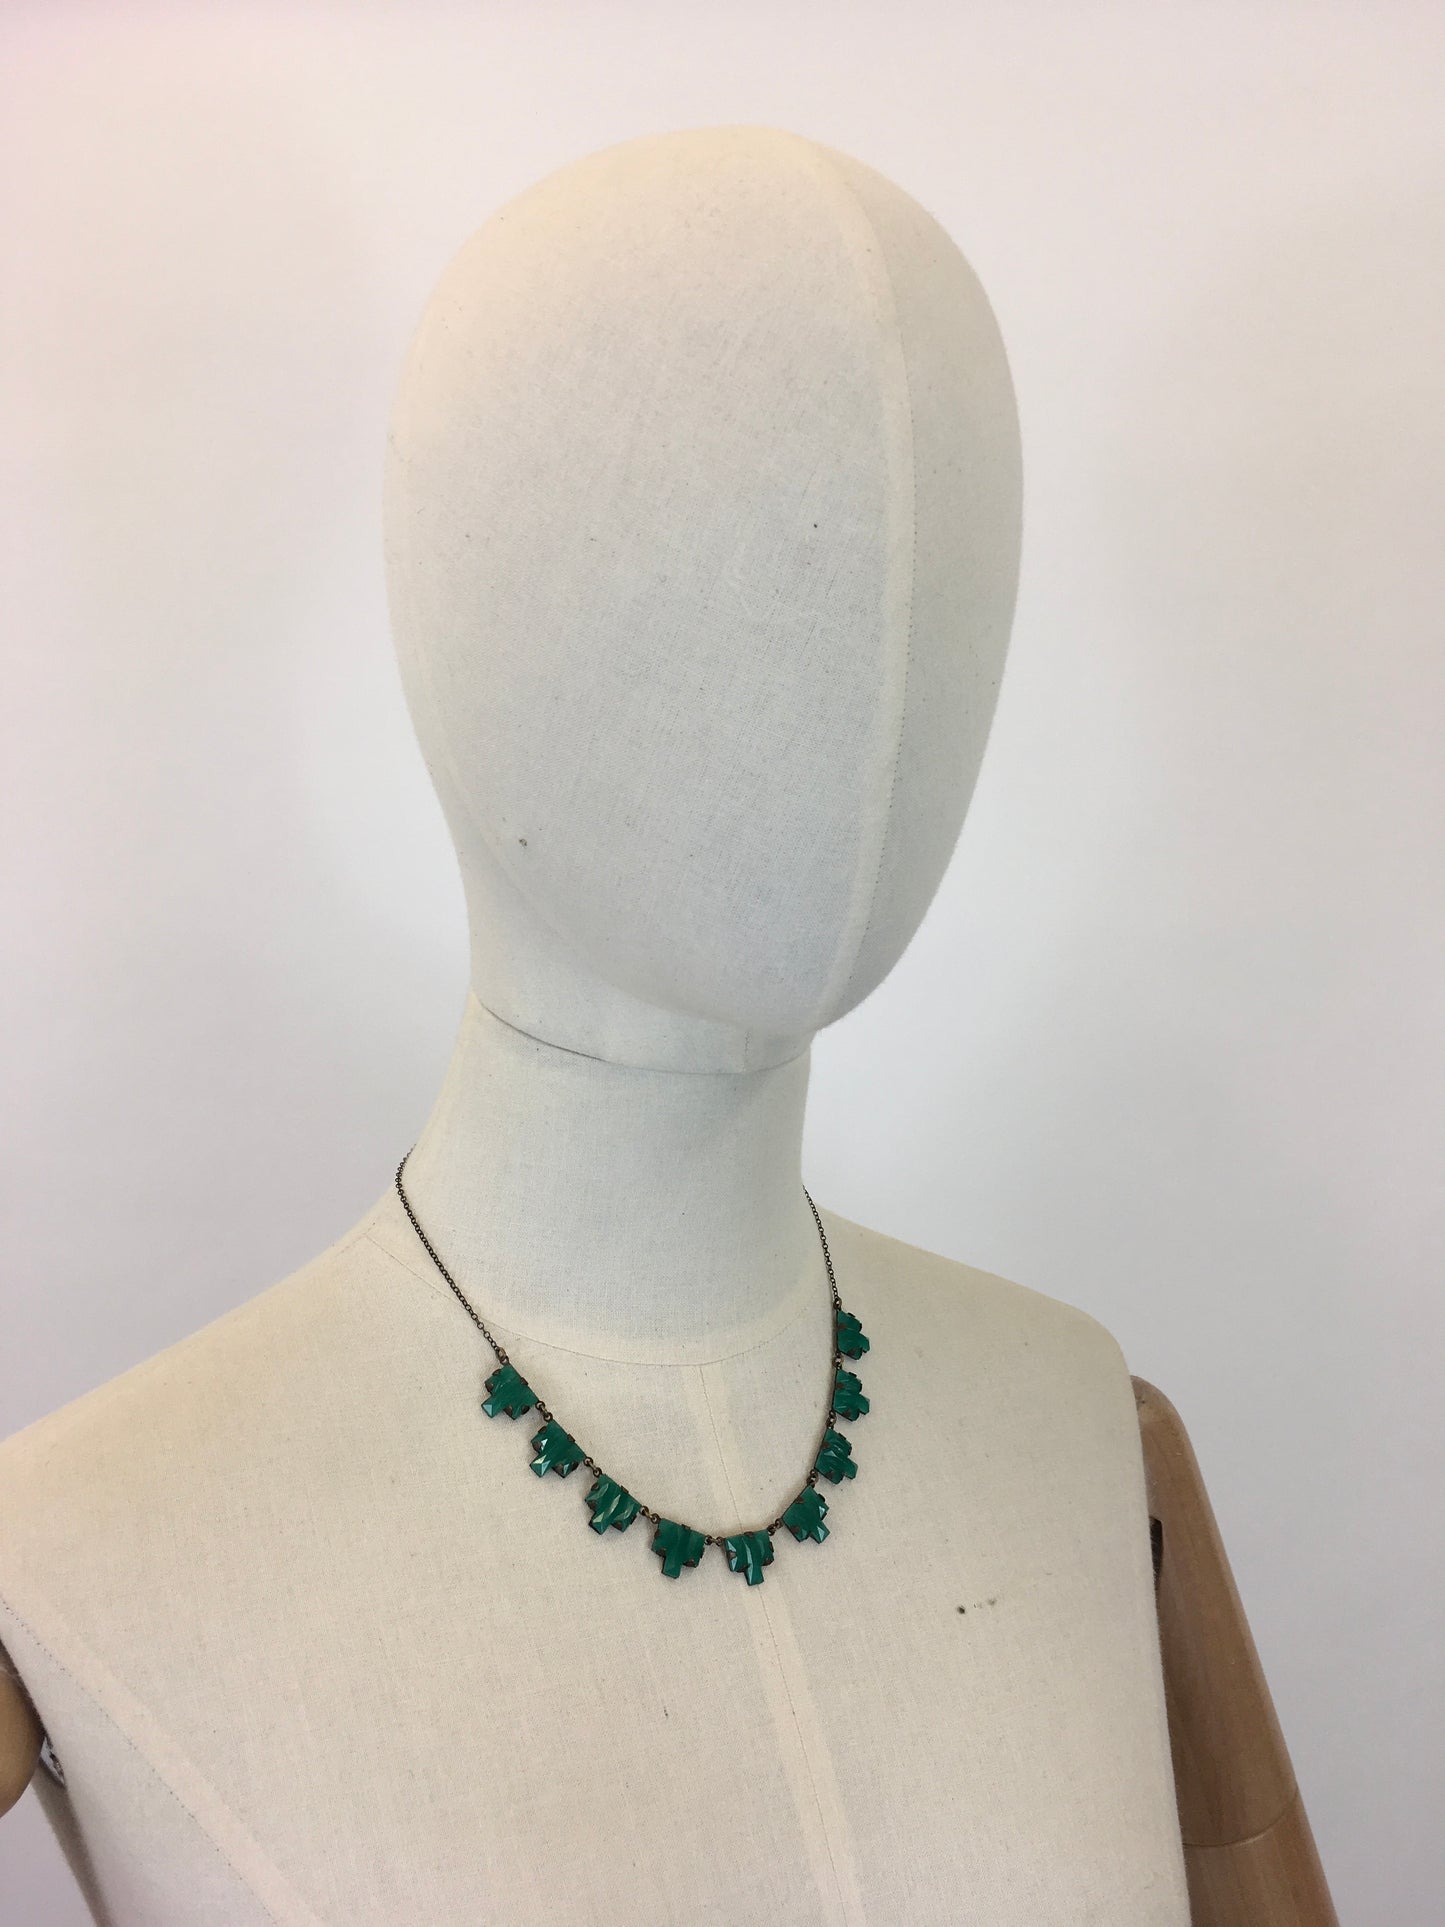 Original 1930’s Art Deco Shaped Necklace - With Jade Green Glass